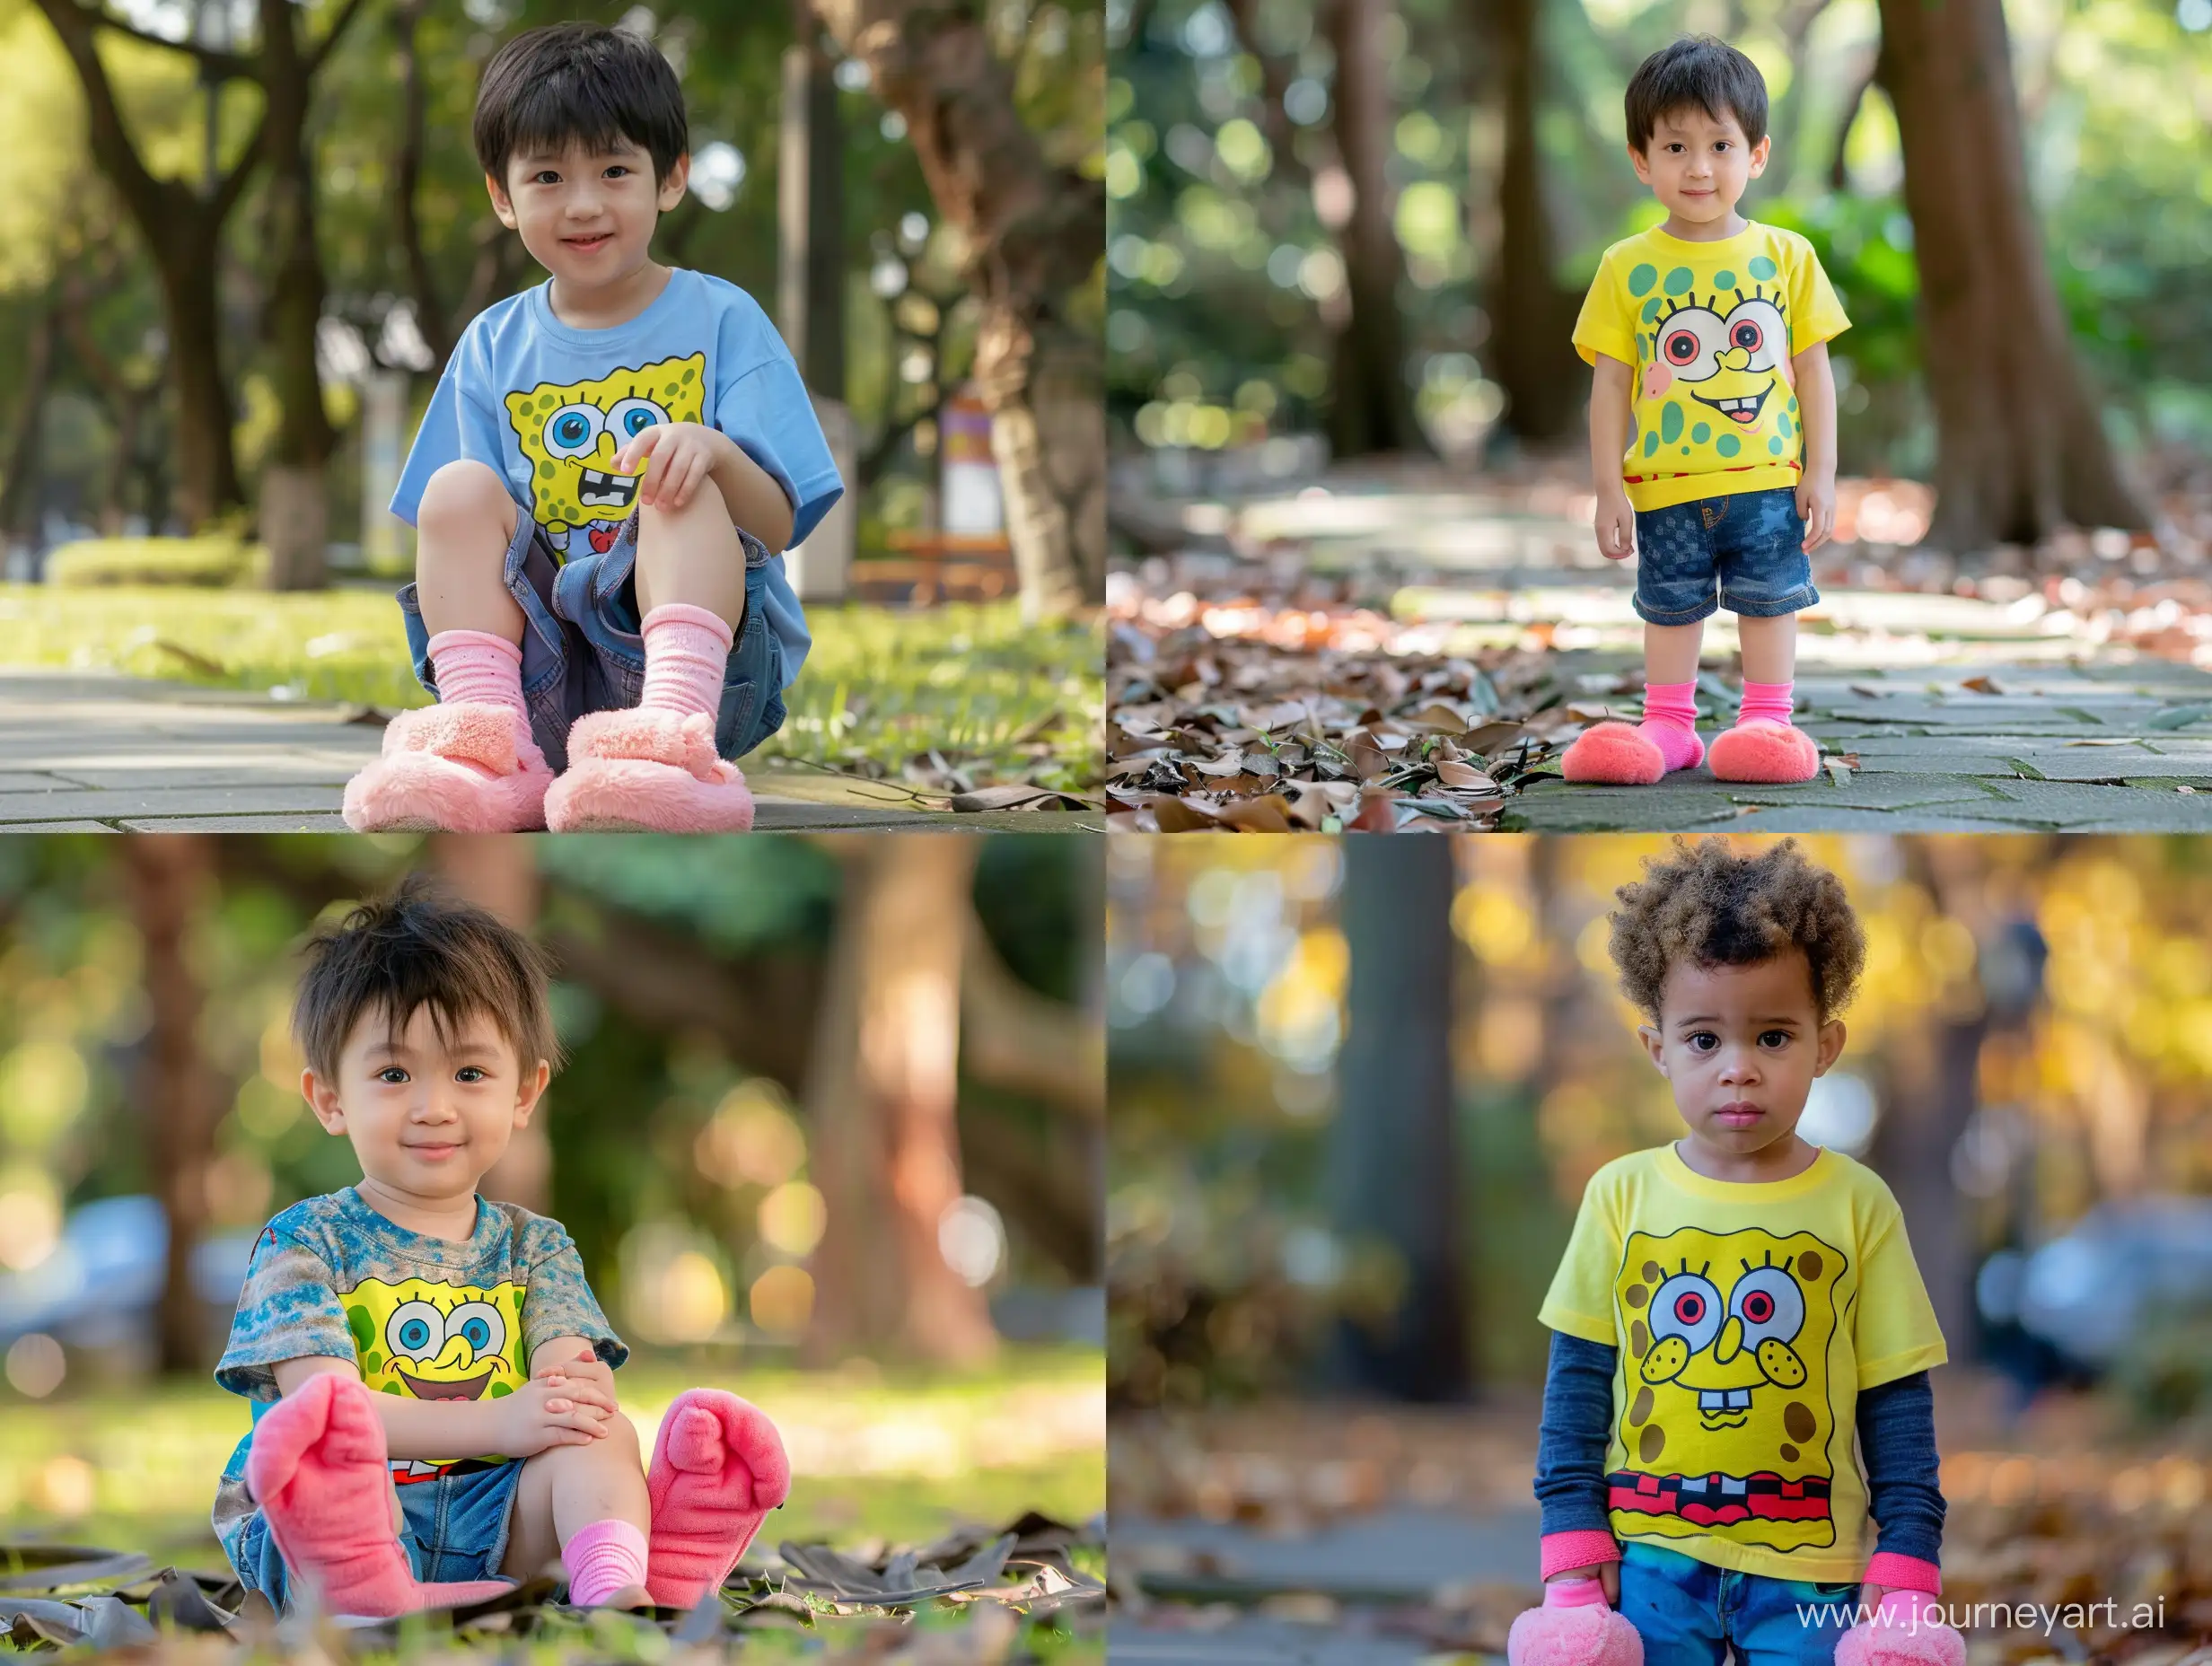 Real and natural photo of cute young boy in spongebob t-shirt and pink slippers and socks in the park.